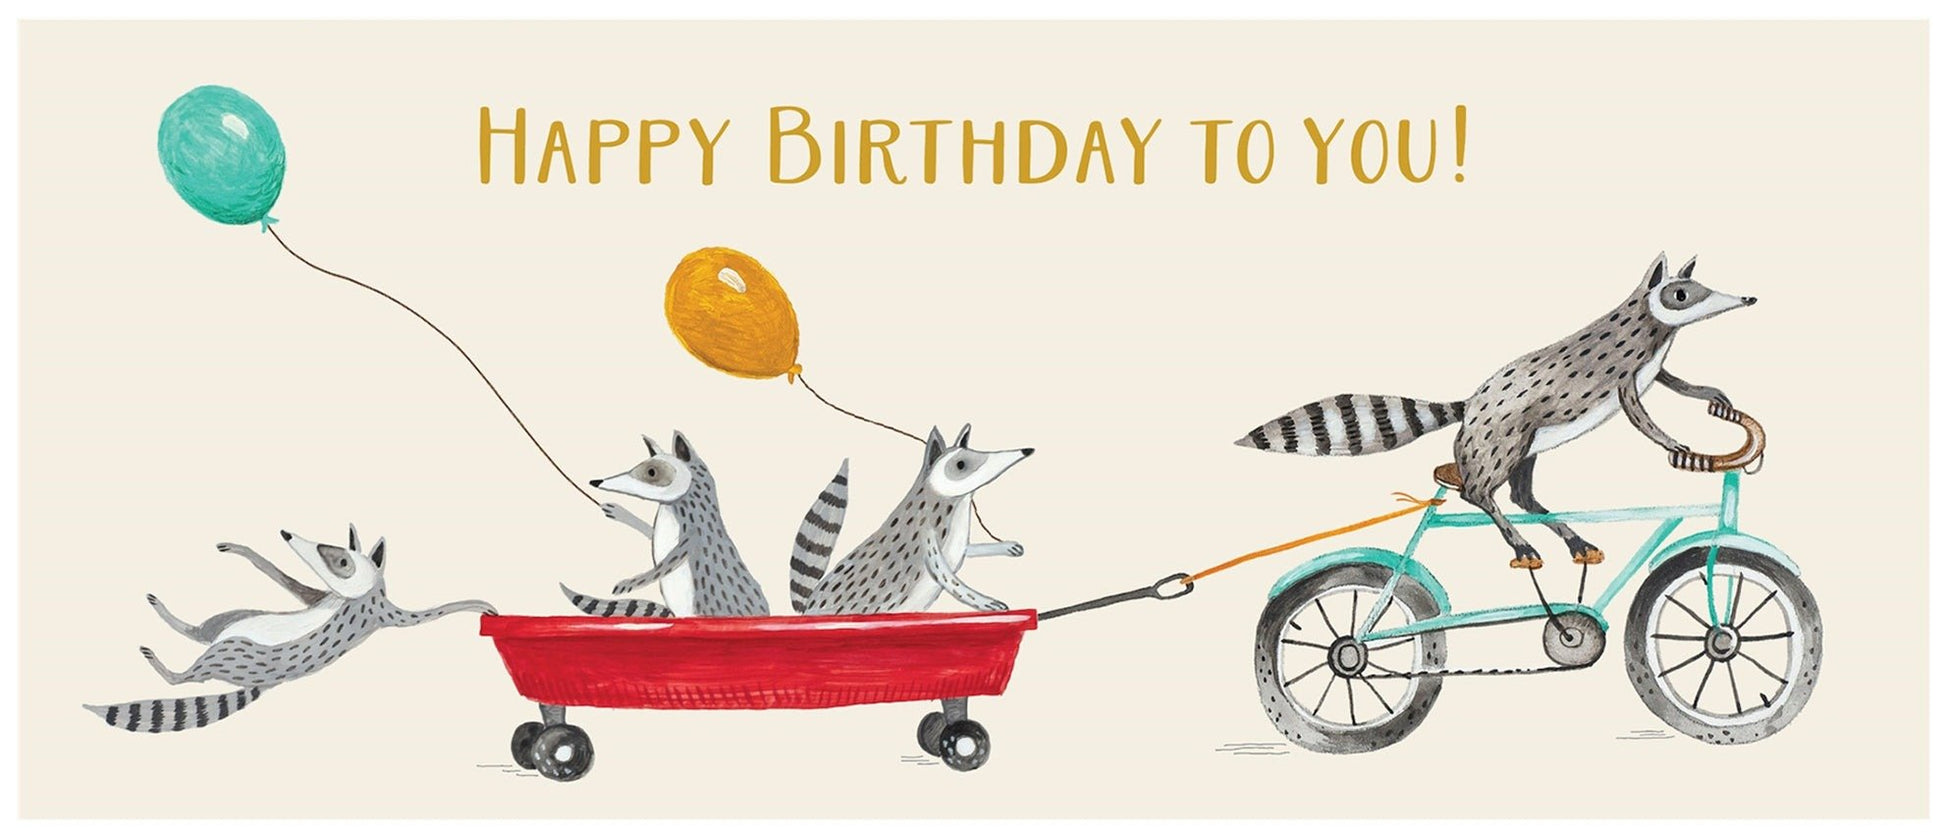 These happy birthday raccoons are a fun loving bunch as the ride a bike and pull a red wagon with several raccoons hanging on for a fun trip.